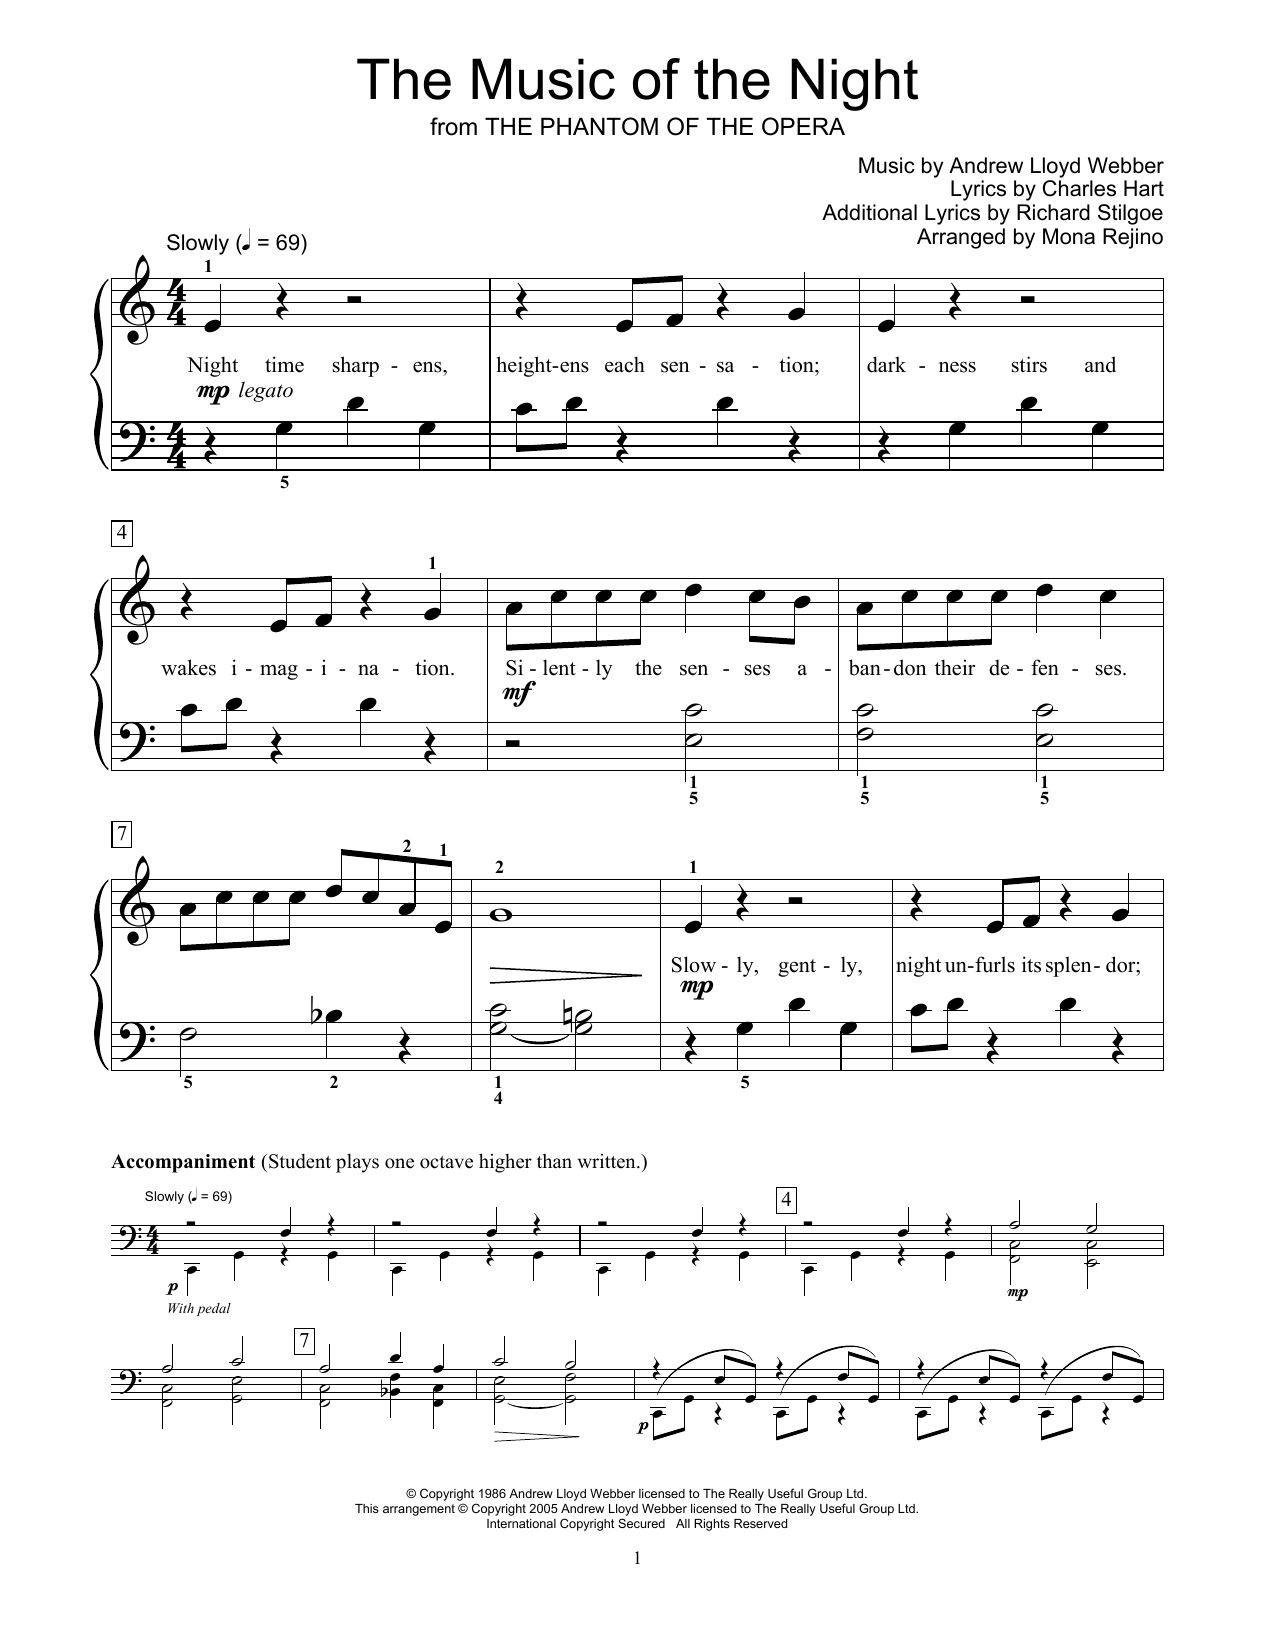 Andrew Lloyd Webber The Music Of The Night (from The Phantom Of The Opera) (arr. Mona Rejino) sheet music notes and chords. Download Printable PDF.